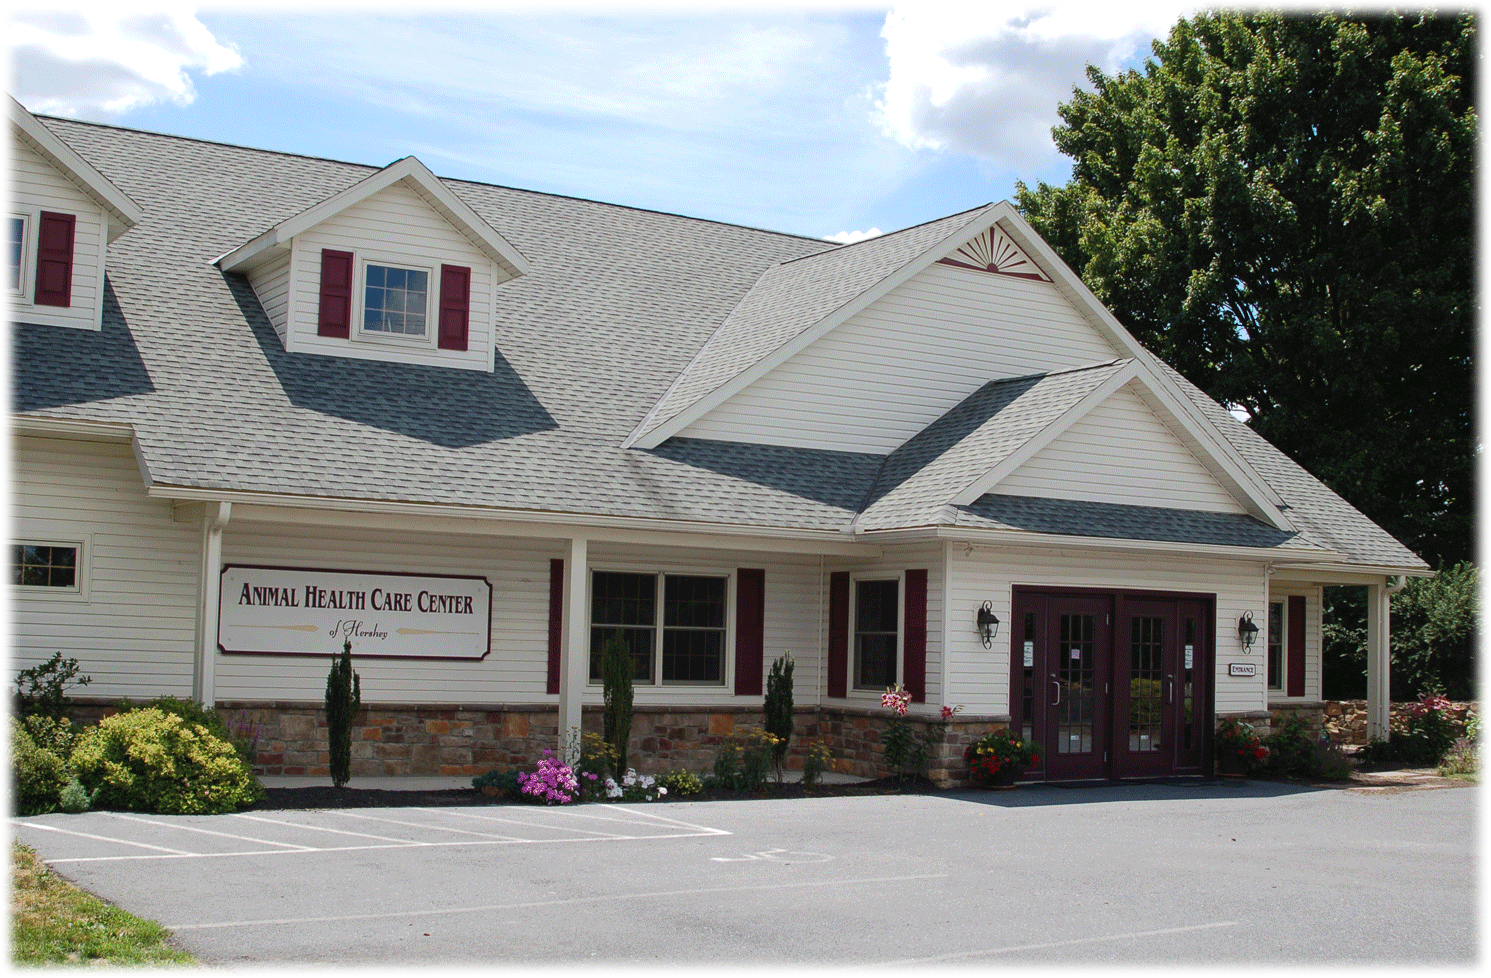 The Animal Health Care Center of Hershey